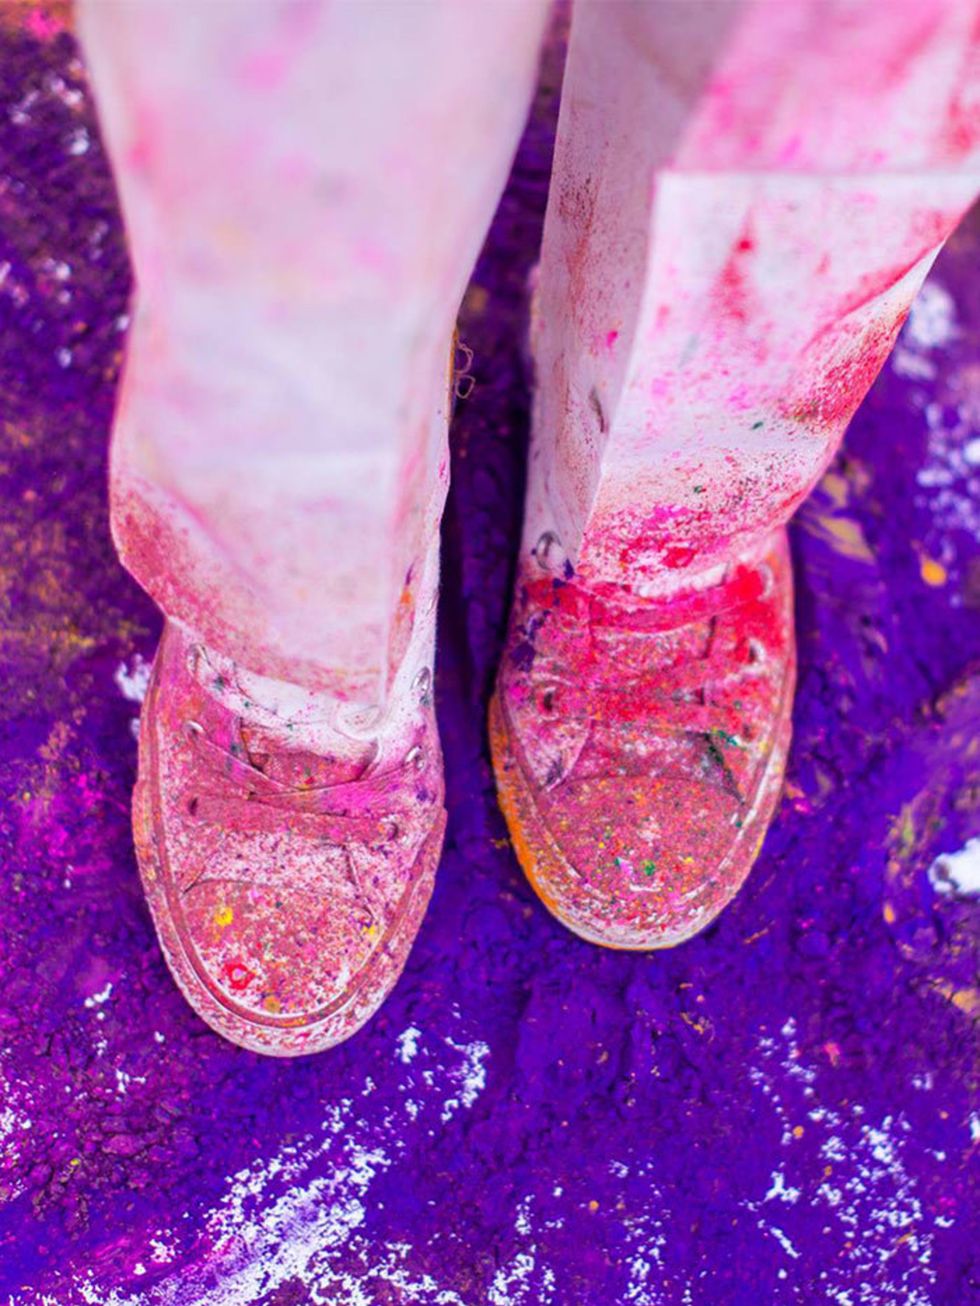 <p>EVENT: House of Holi at Cinnamon Kitchen</p>

<p>Ready to paint the town red? And blue? And yellow? And You get the idea. This Friday sees the return of Cinnamon Kitchens pop-up party pod in celebration of the Indian festival of Holi. You know, the o